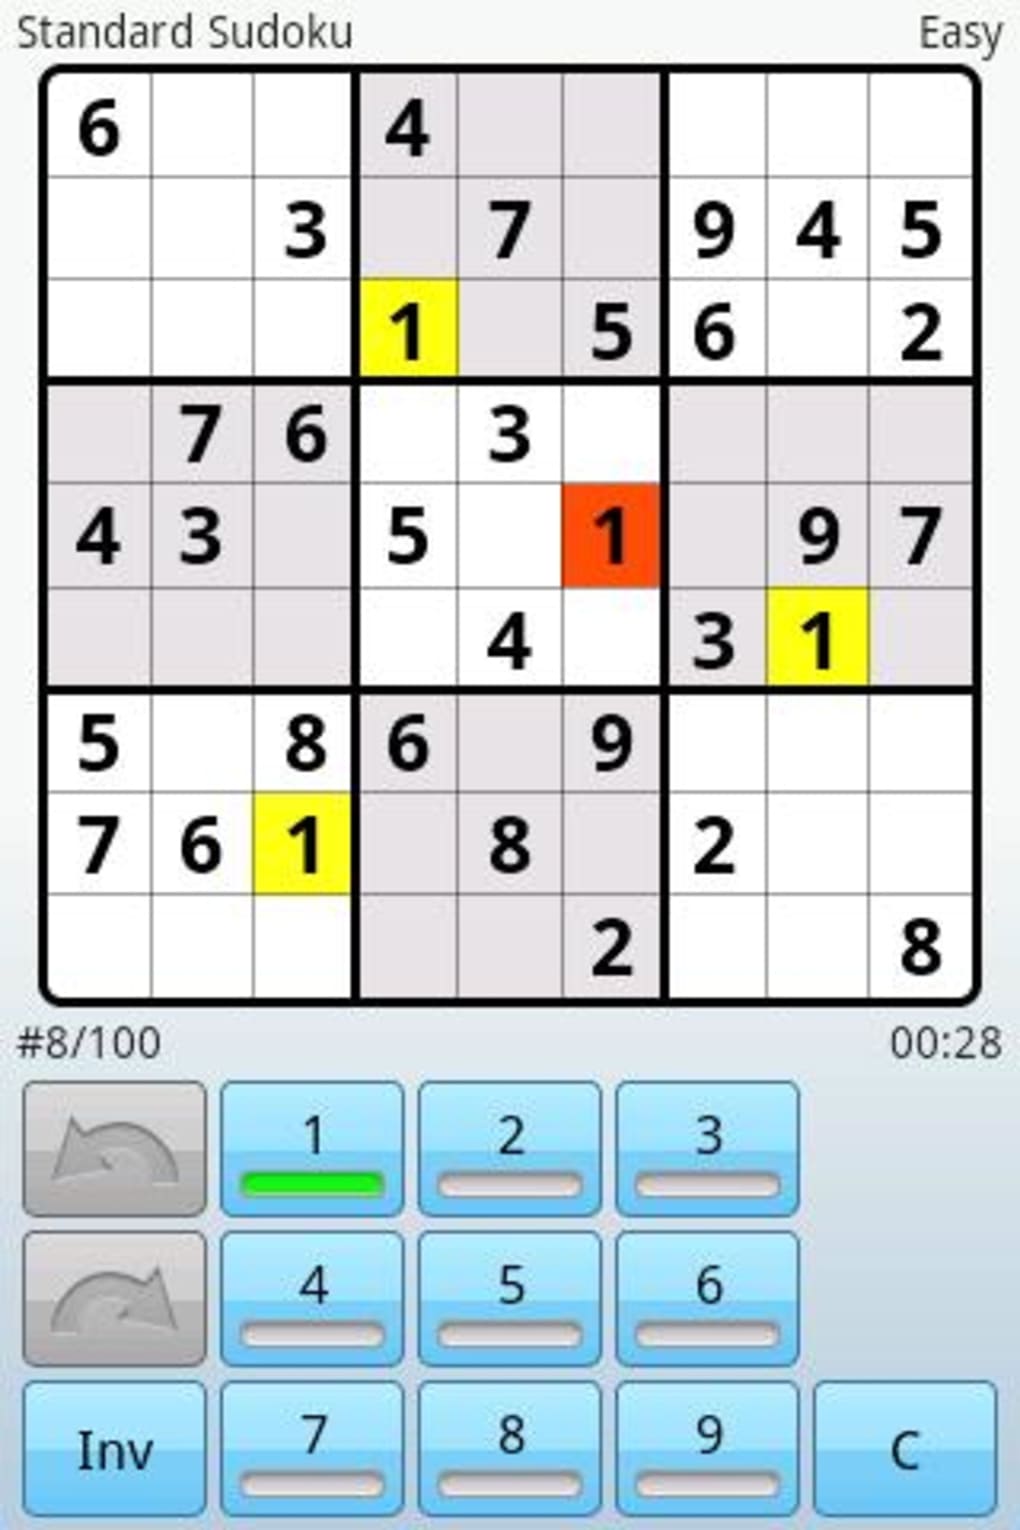 downloading Sudoku (Oh no! Another one!)